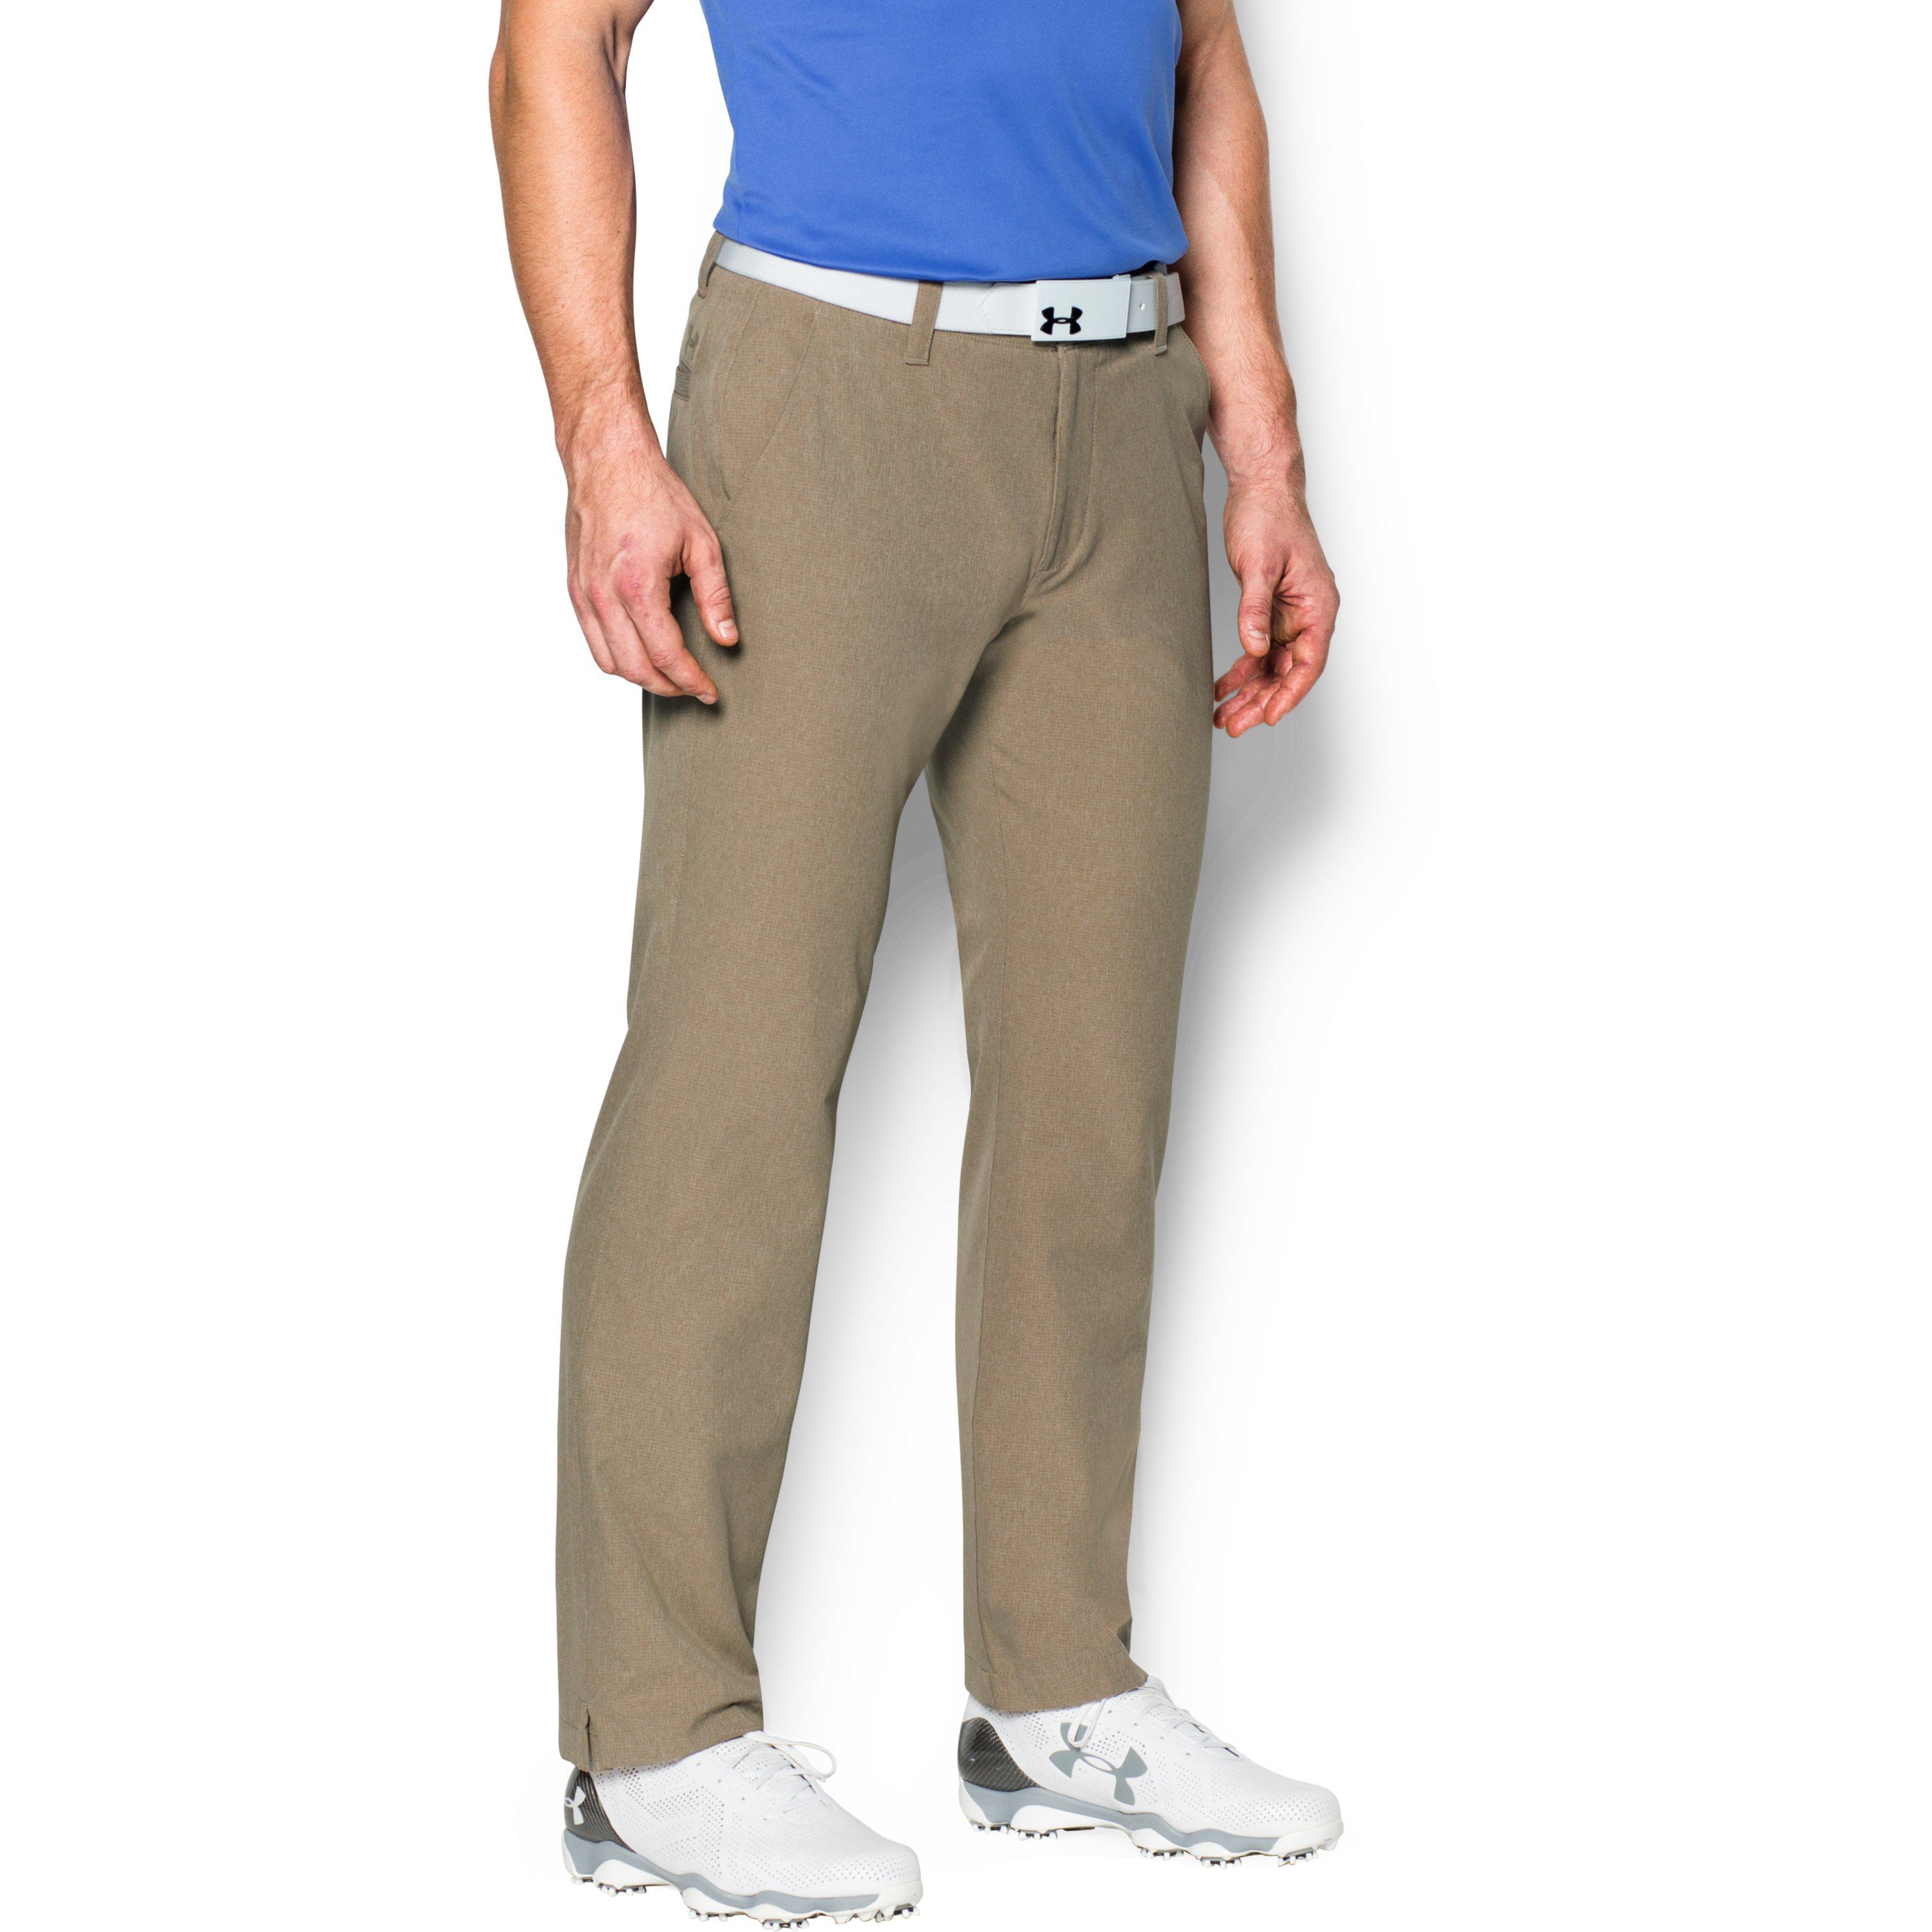 Ua Match Play Vented Pants for Men - Lyst